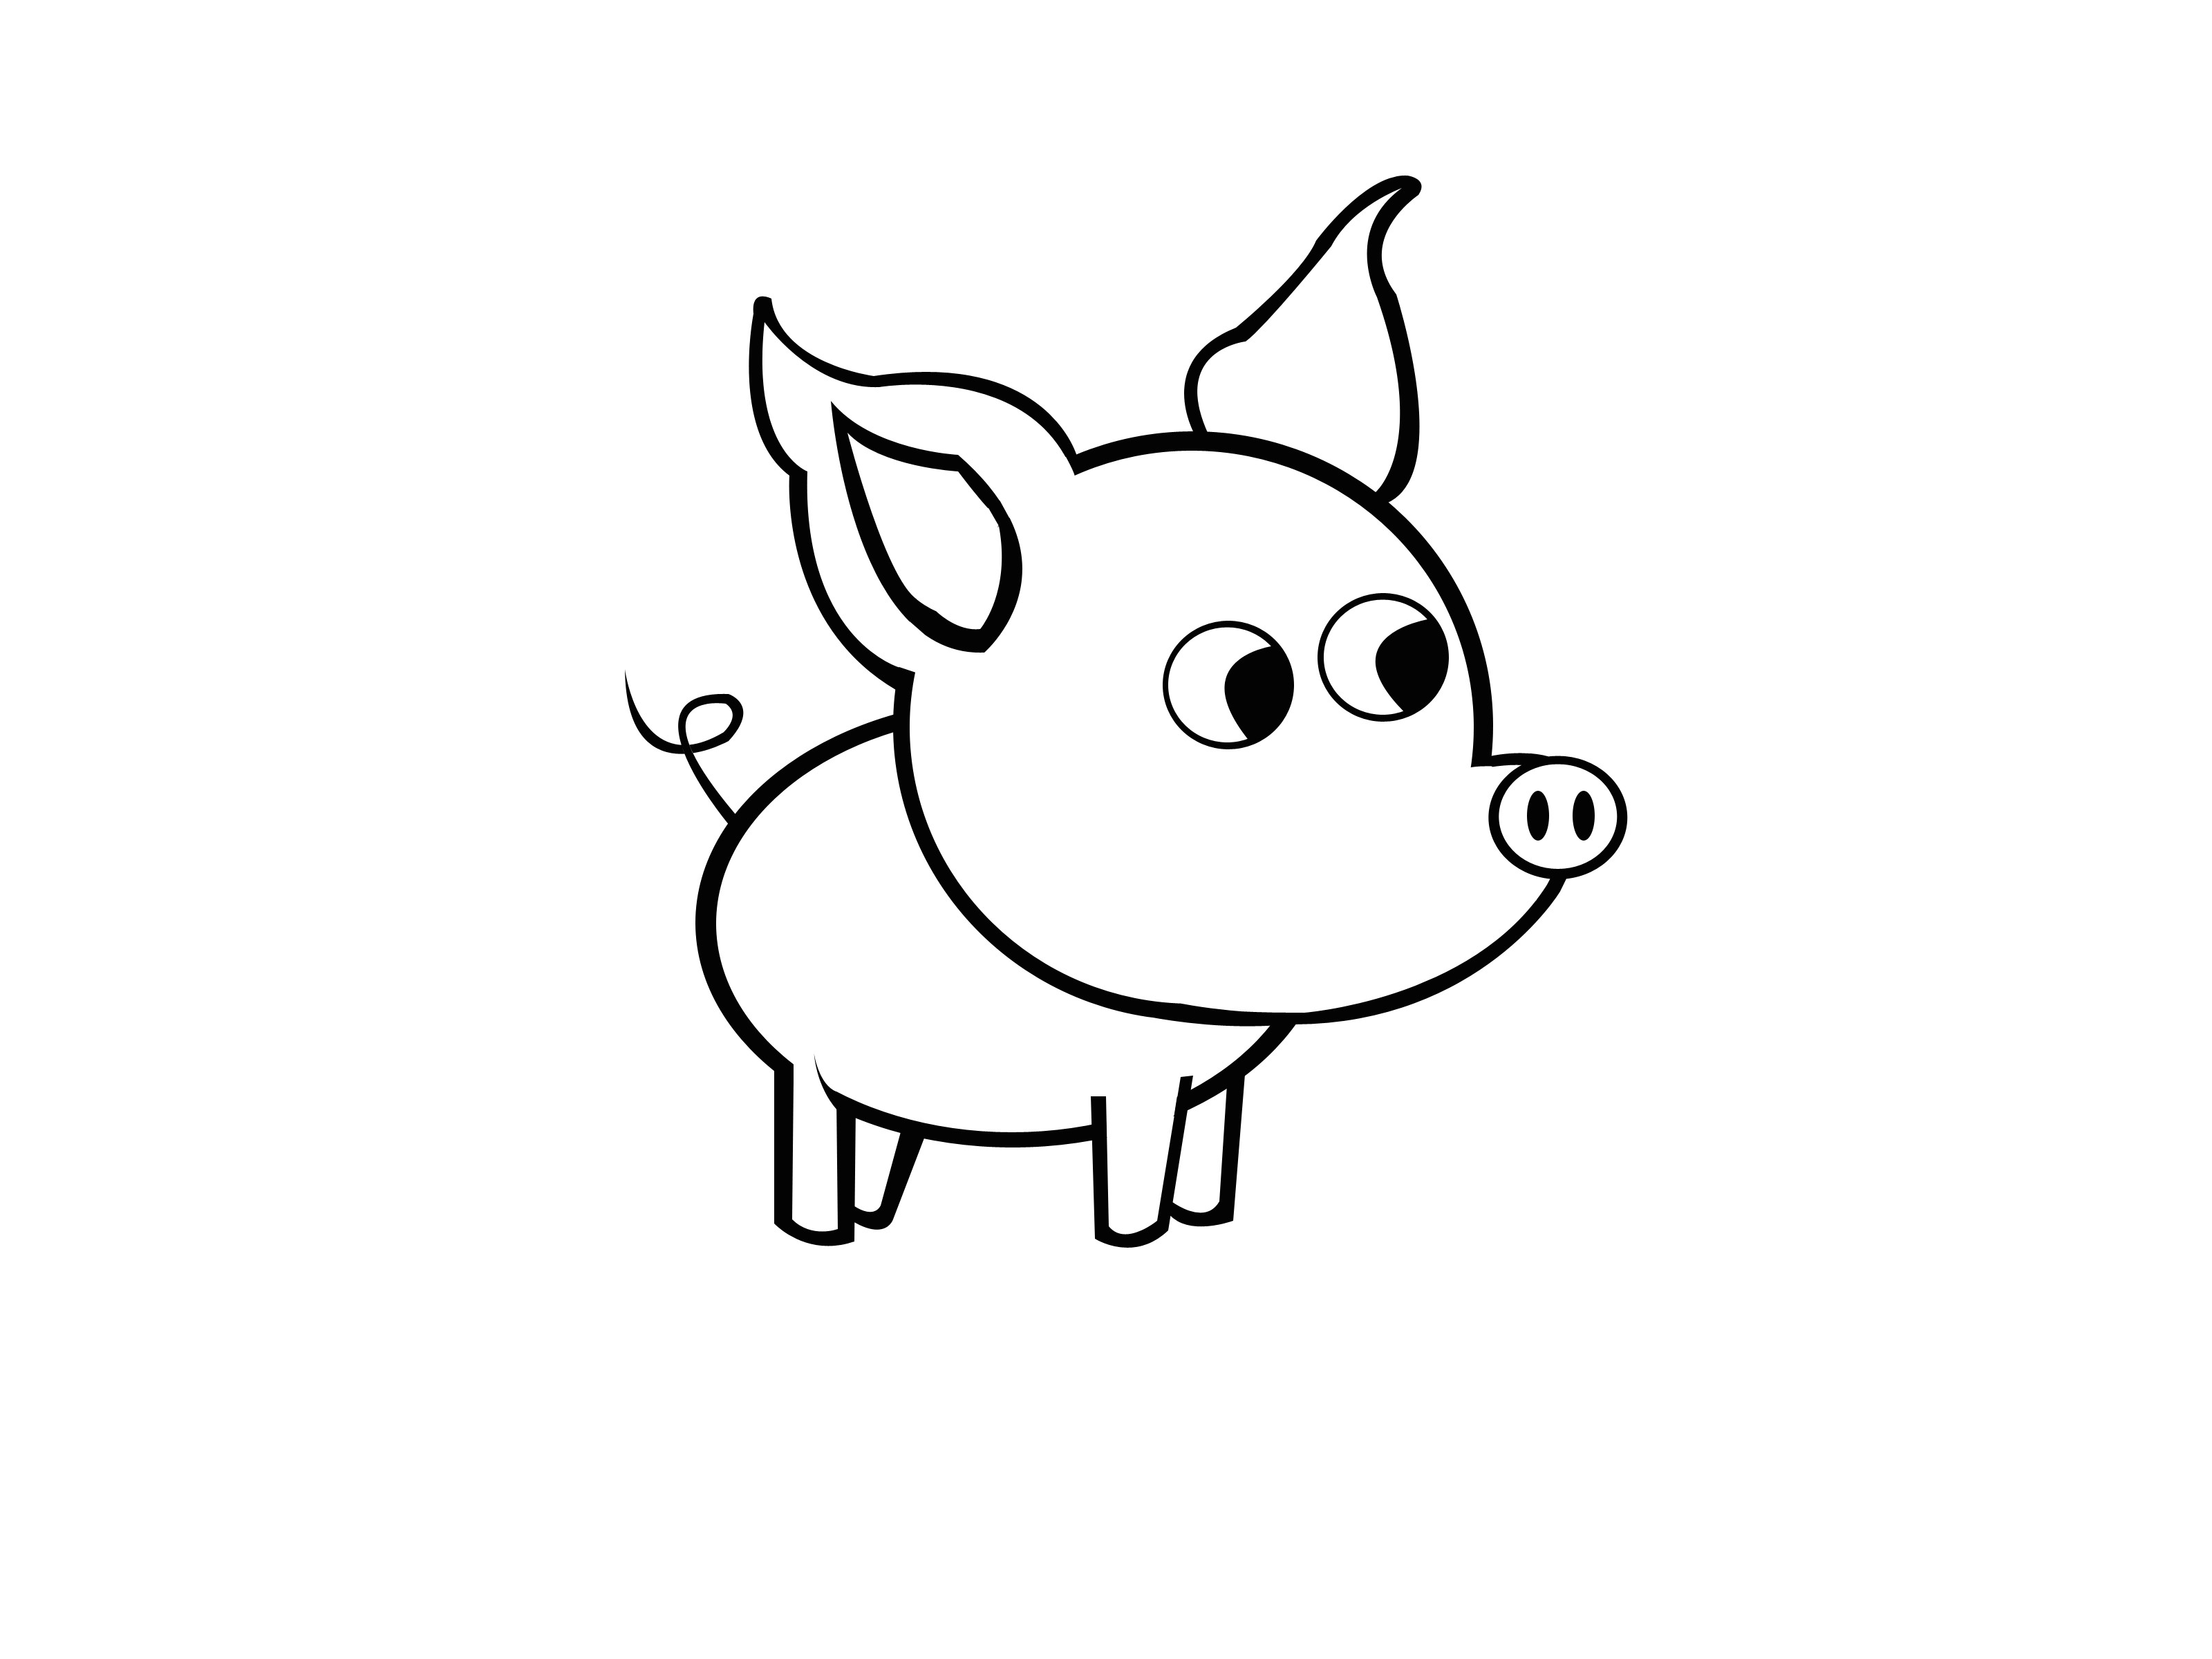 Drawing Jungkook Easy How to Draw A Simple Pig 9 Steps with Pictures Wikihow